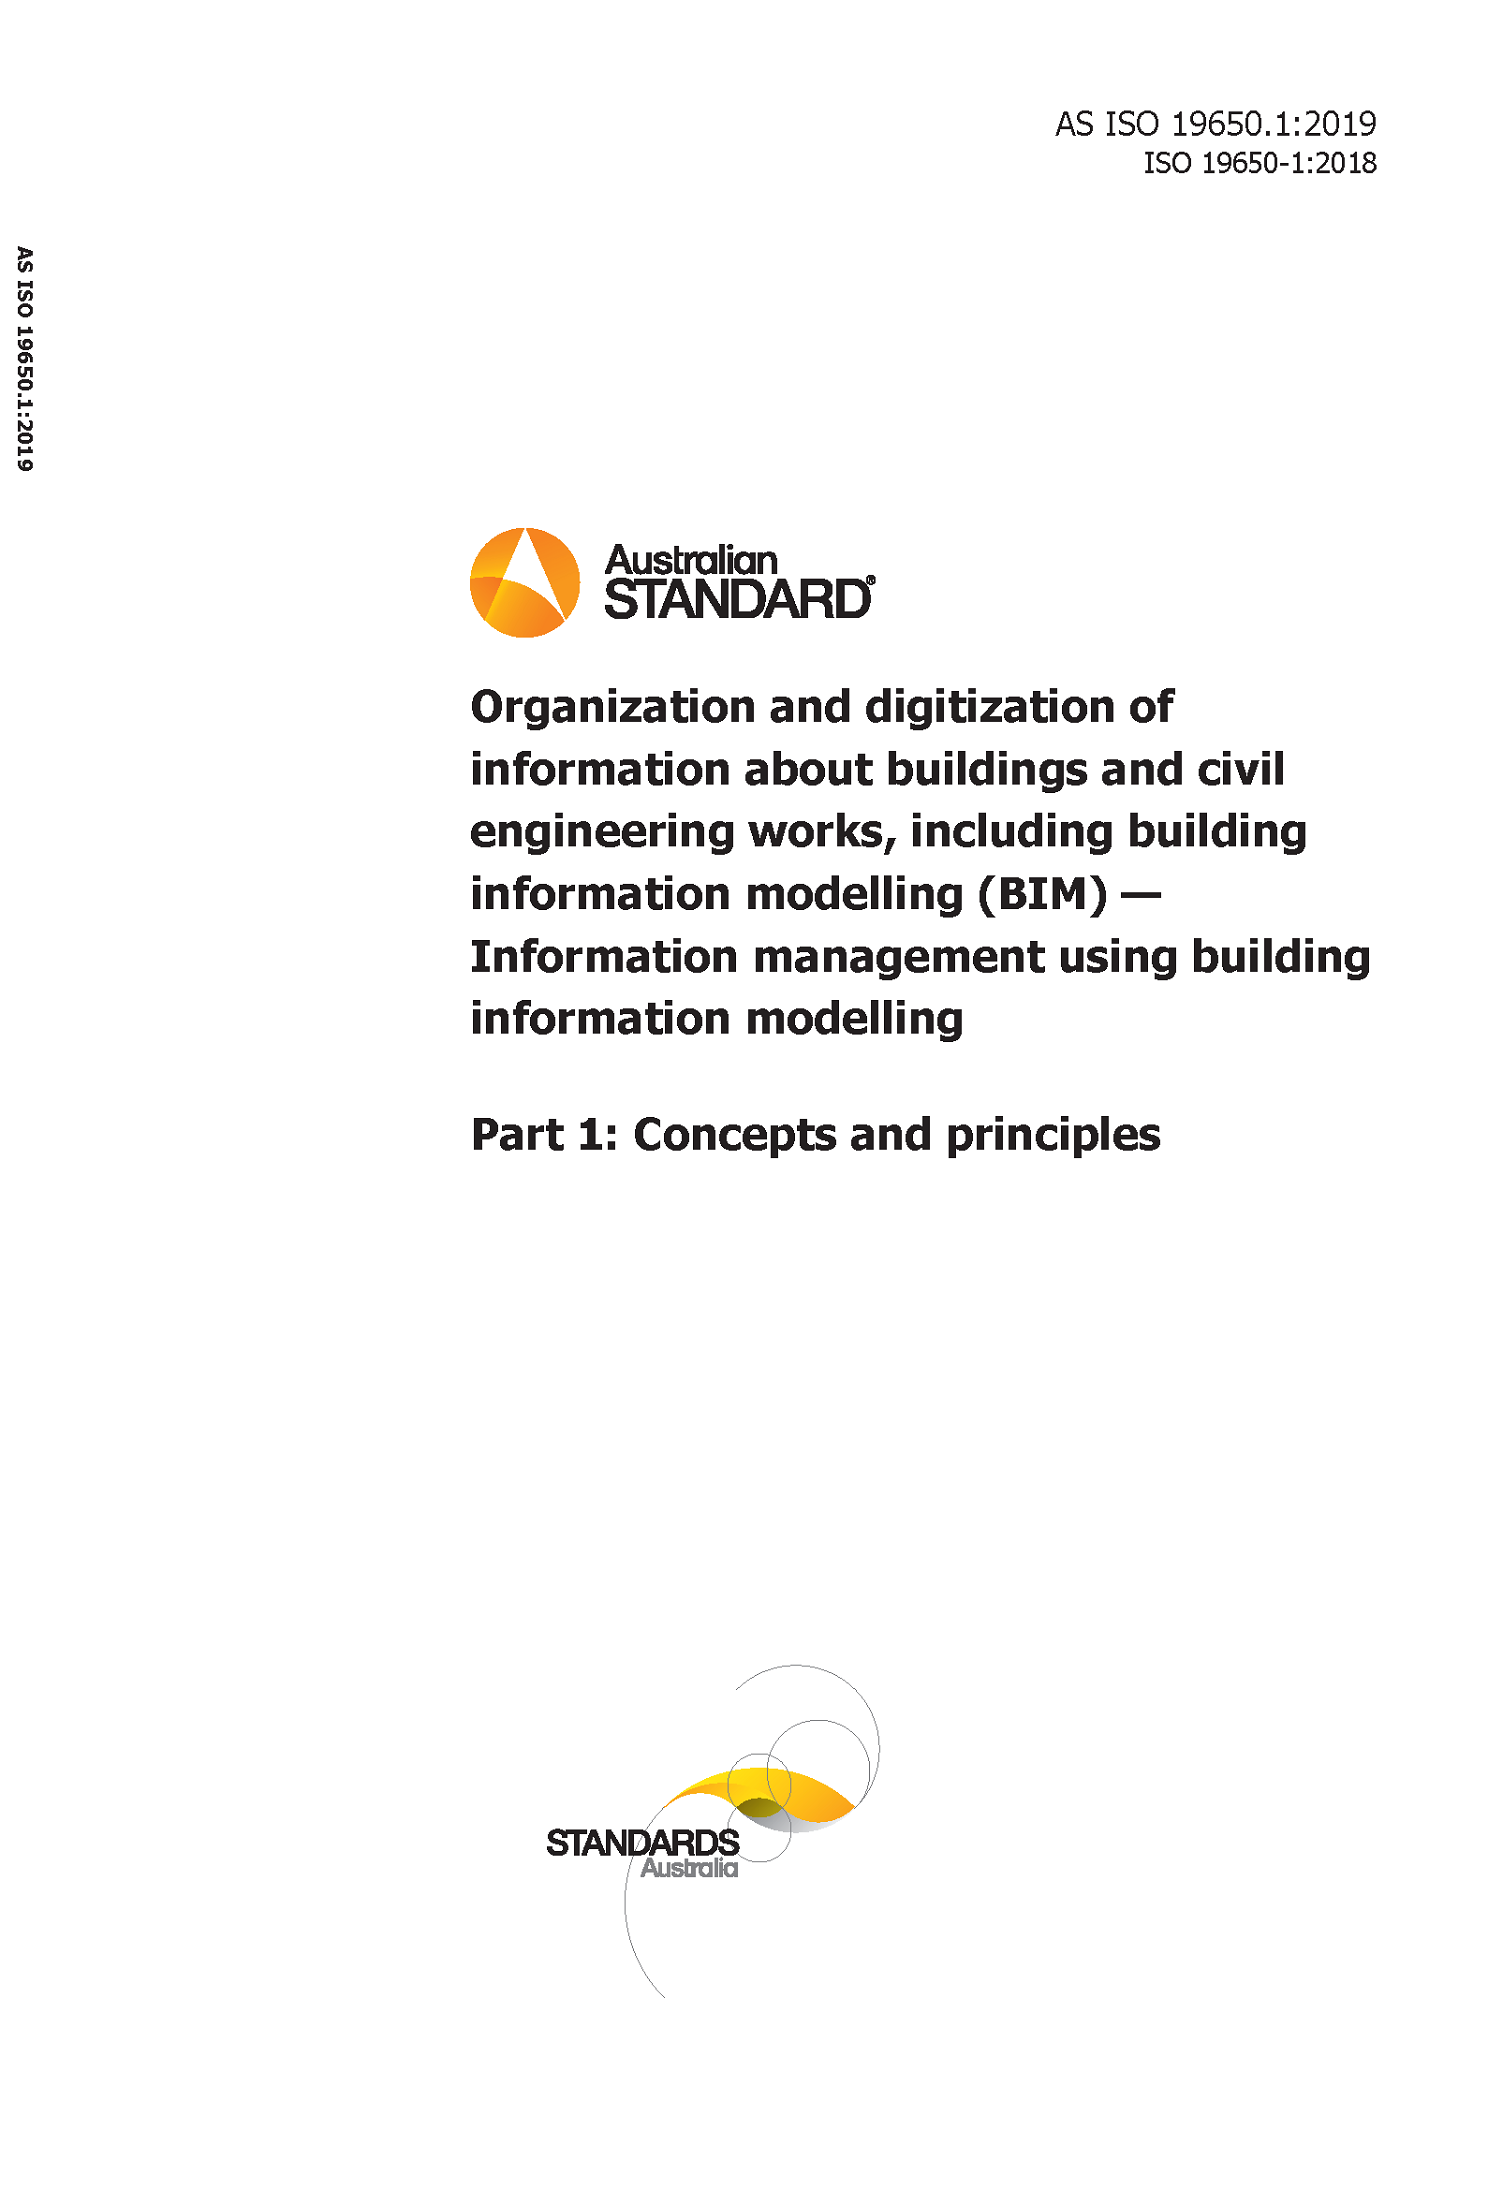 AS ISO 19650.1 cover